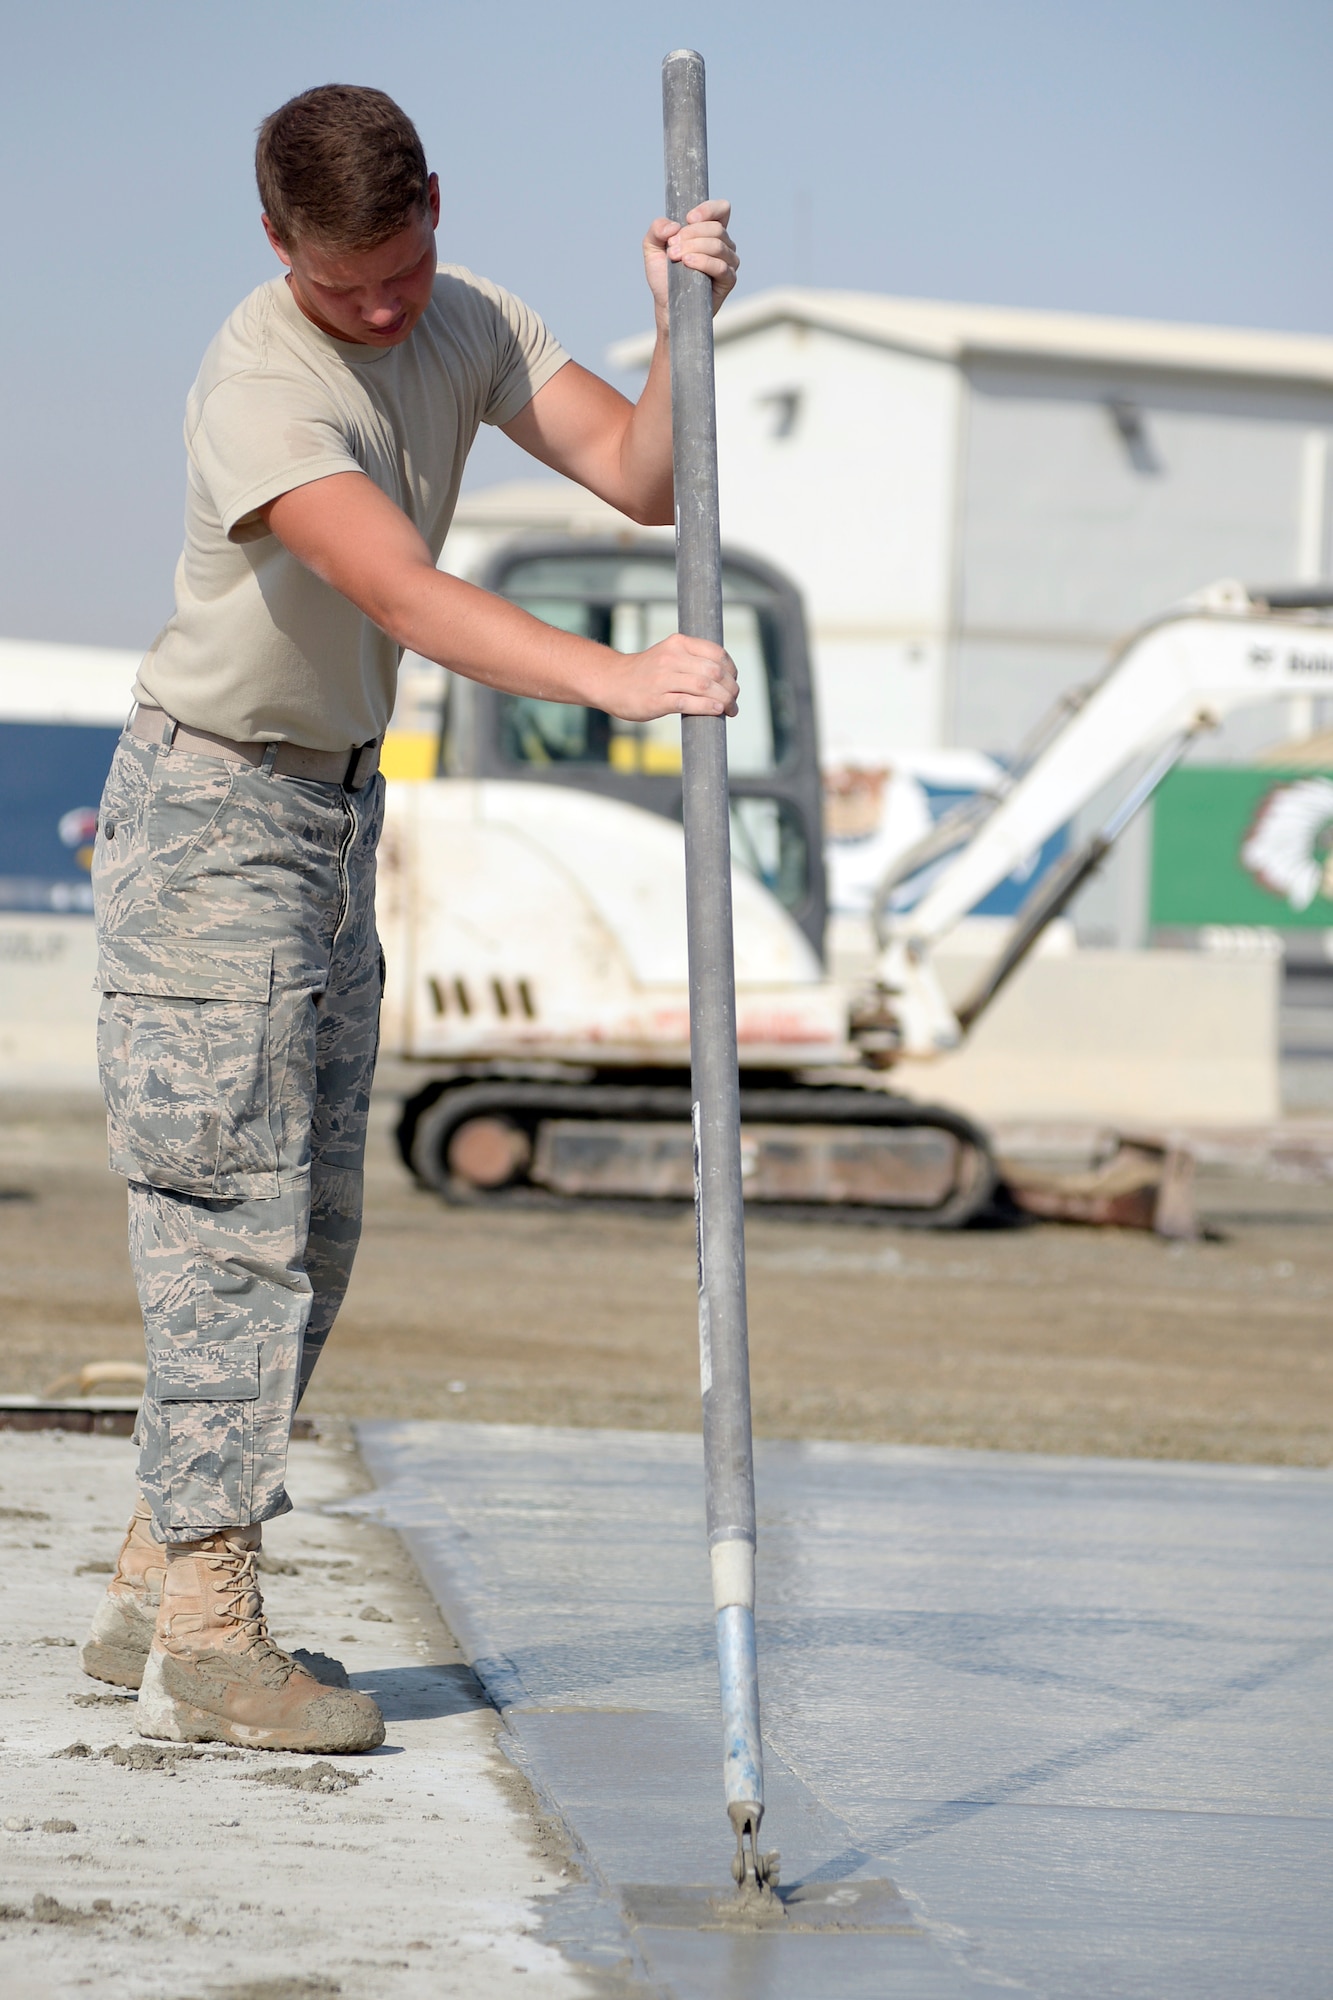 Airman 1st Class Joshua, Expeditionary Civil Engineer Squadron, works on a new concrete pad at the new Australian beddown site at an undisclosed location in Southwest Asia Oct. 30, 2014. Airmen with the ECES worked side-by-side with their Australian counterparts to construct 35 tents. (U.S. Air Force photo/Tech. Sgt. Marie Brown)